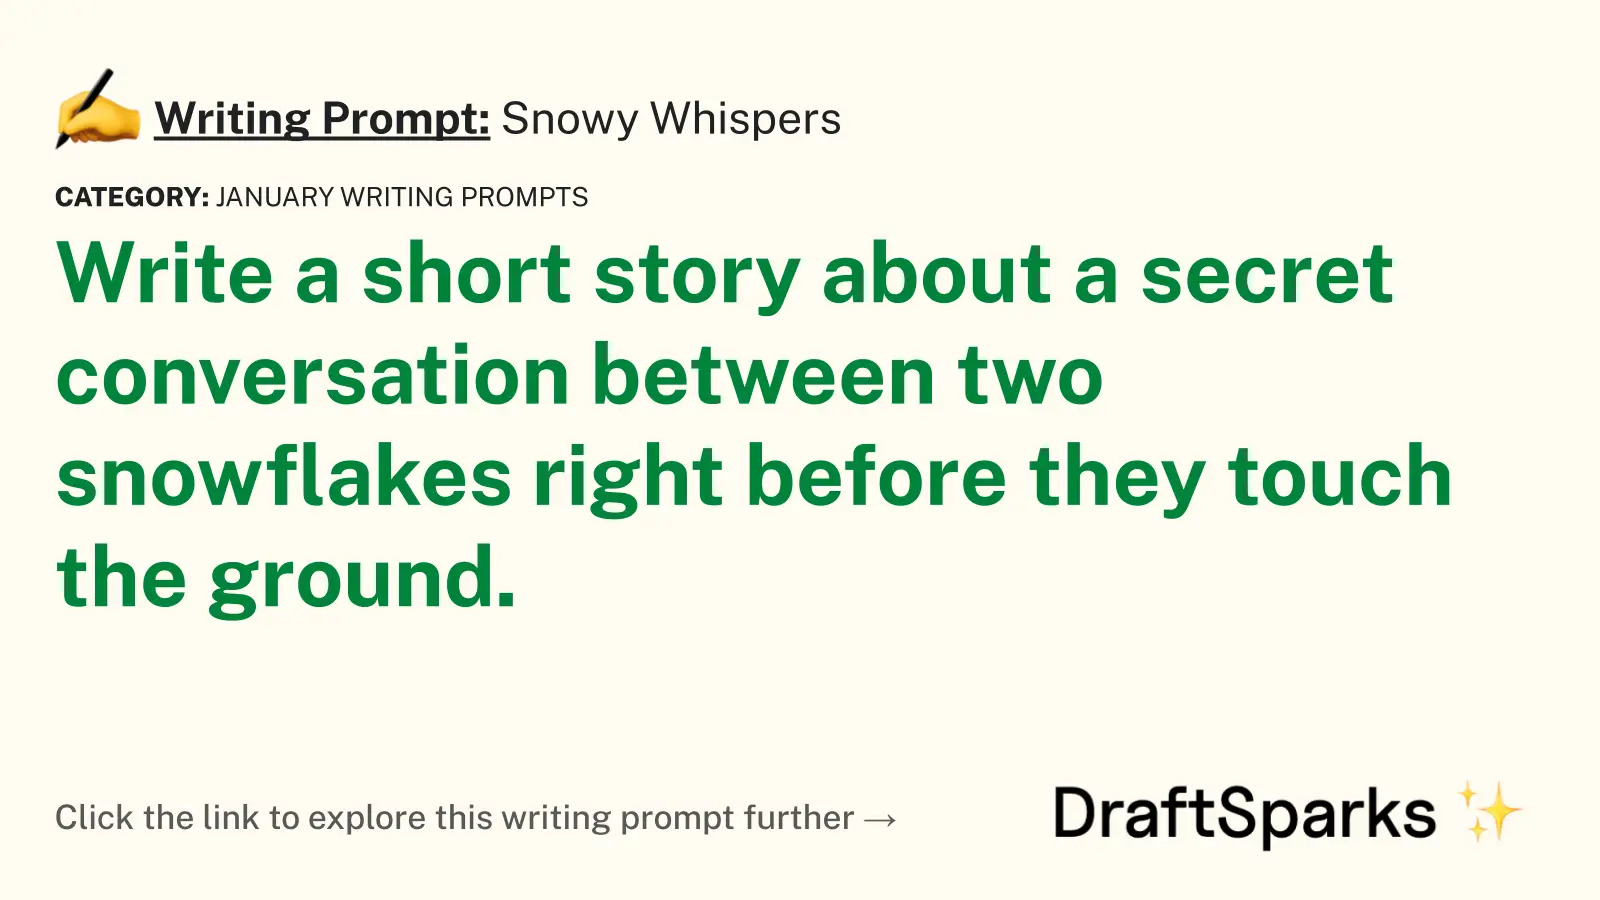 Snowy Whispers